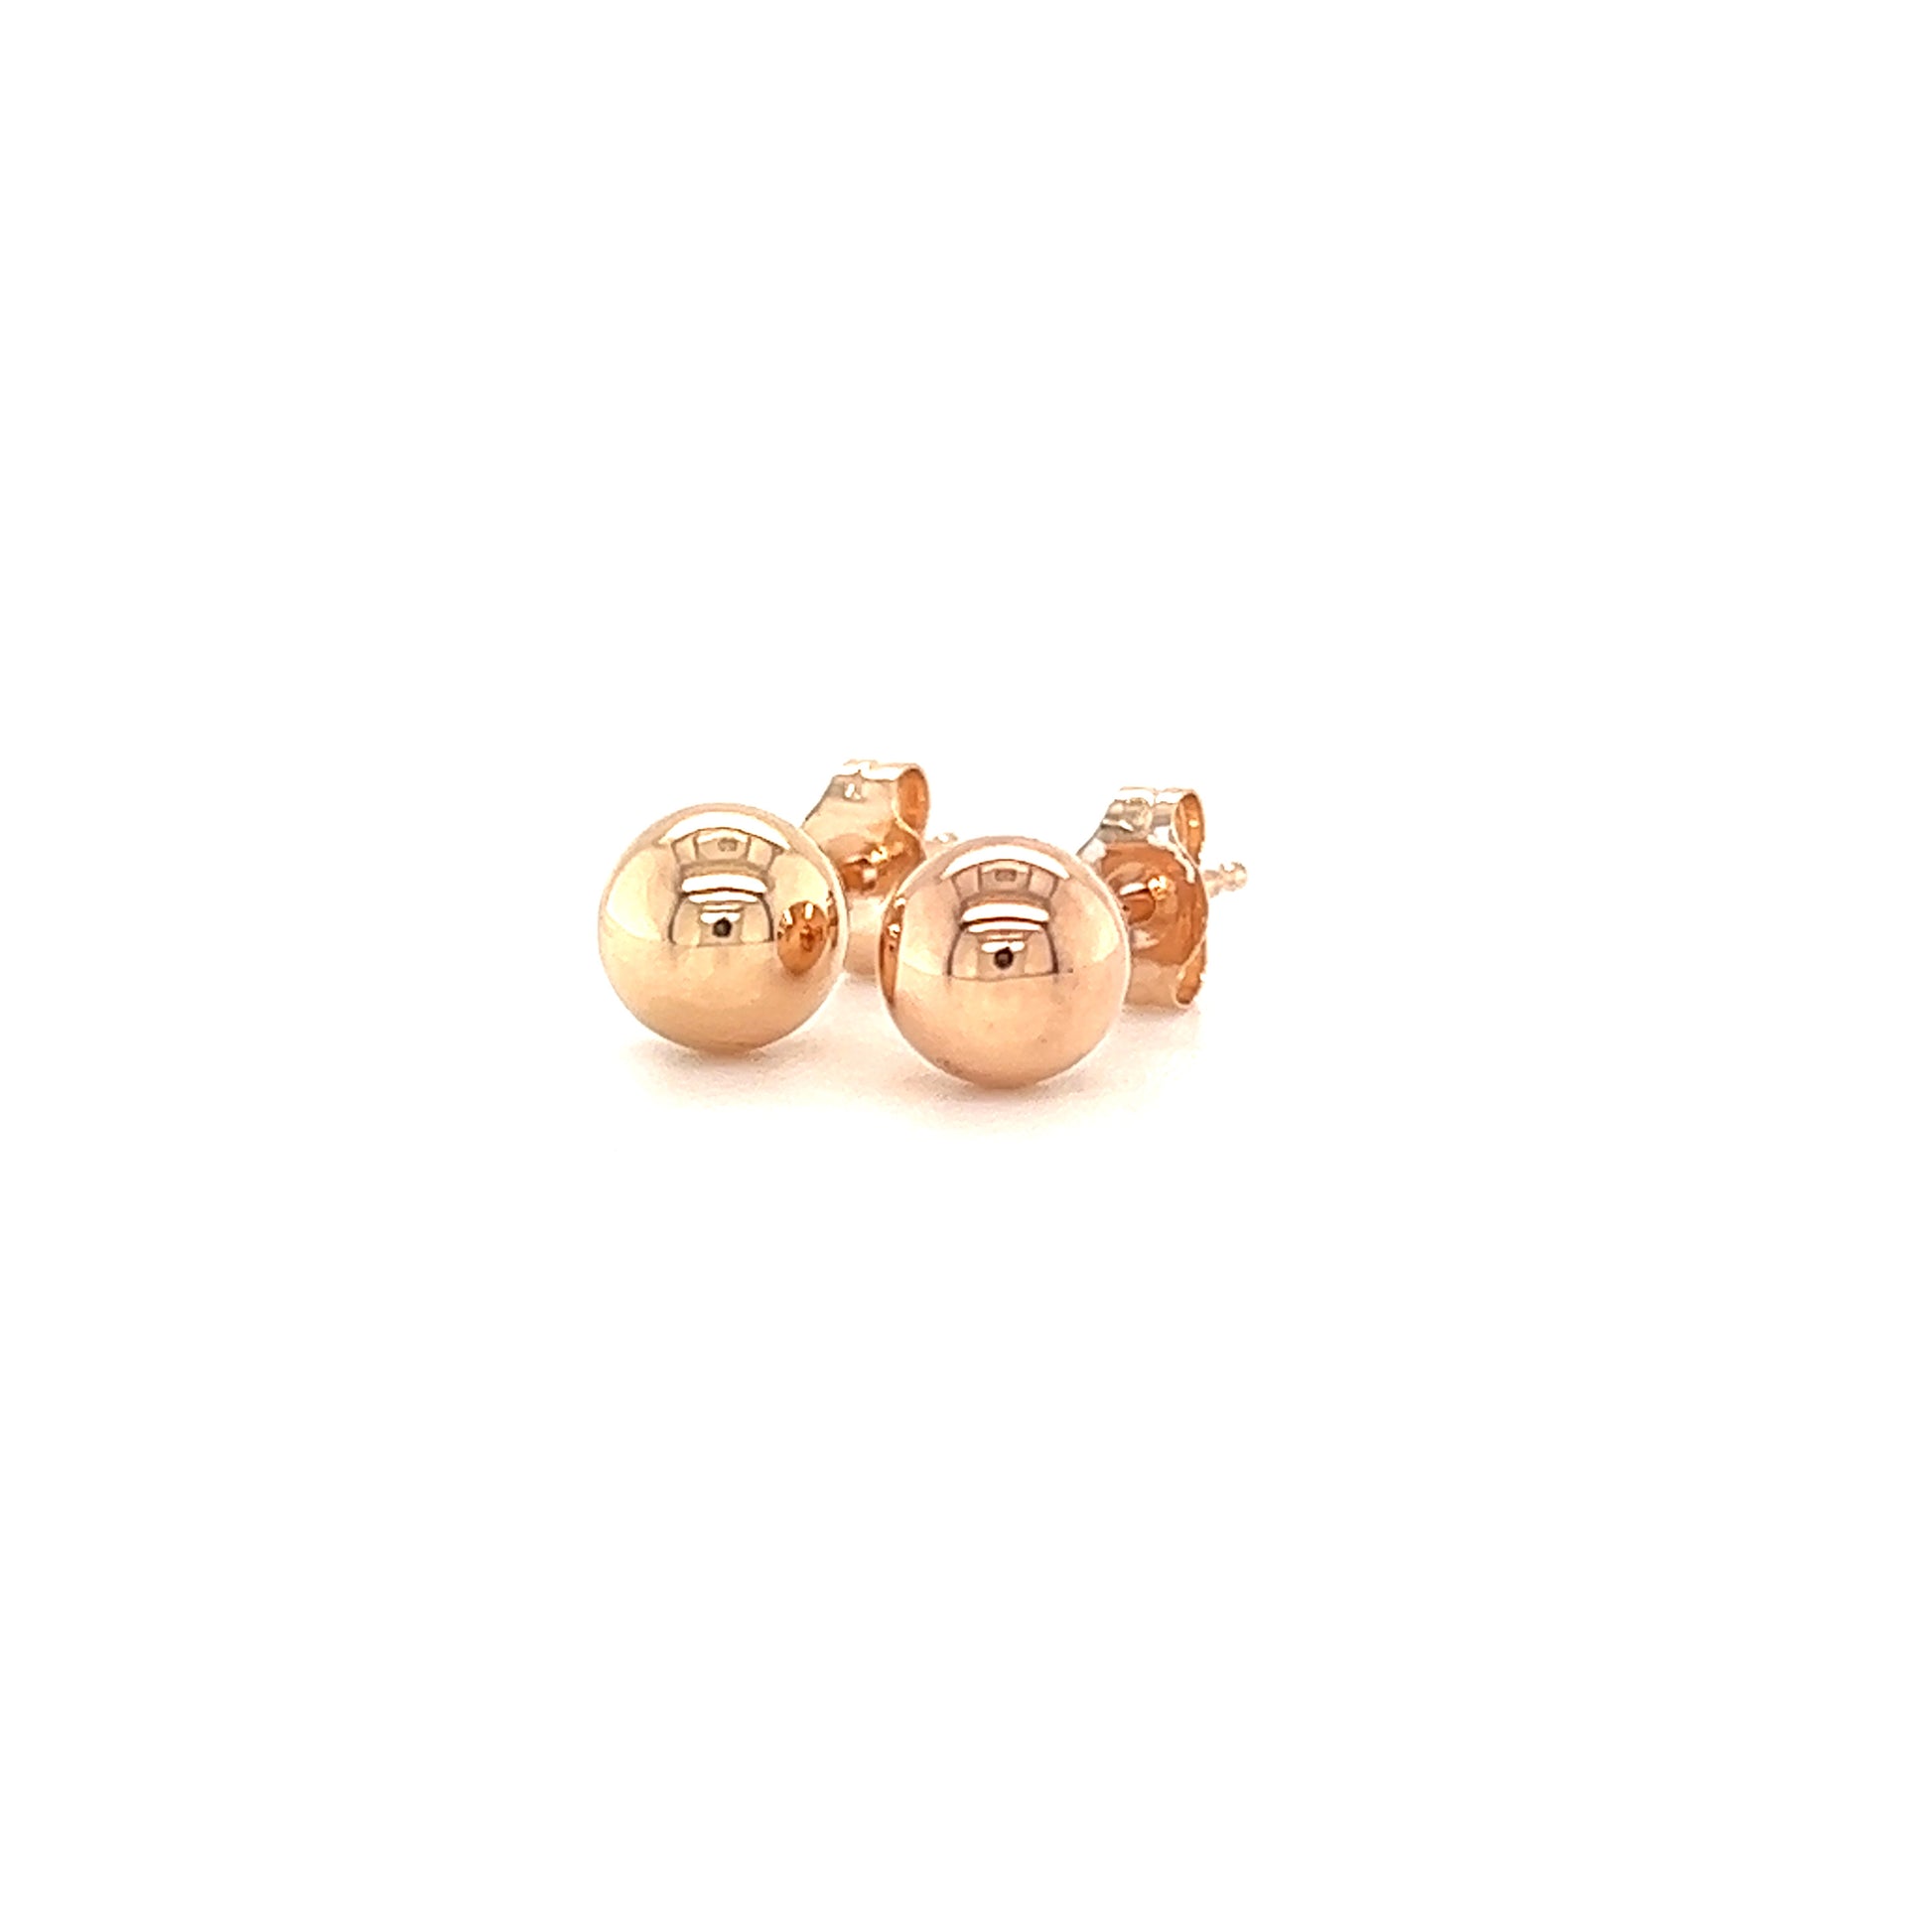 Ball 5mm Stud Earrings  in 14K Gold Right Side View